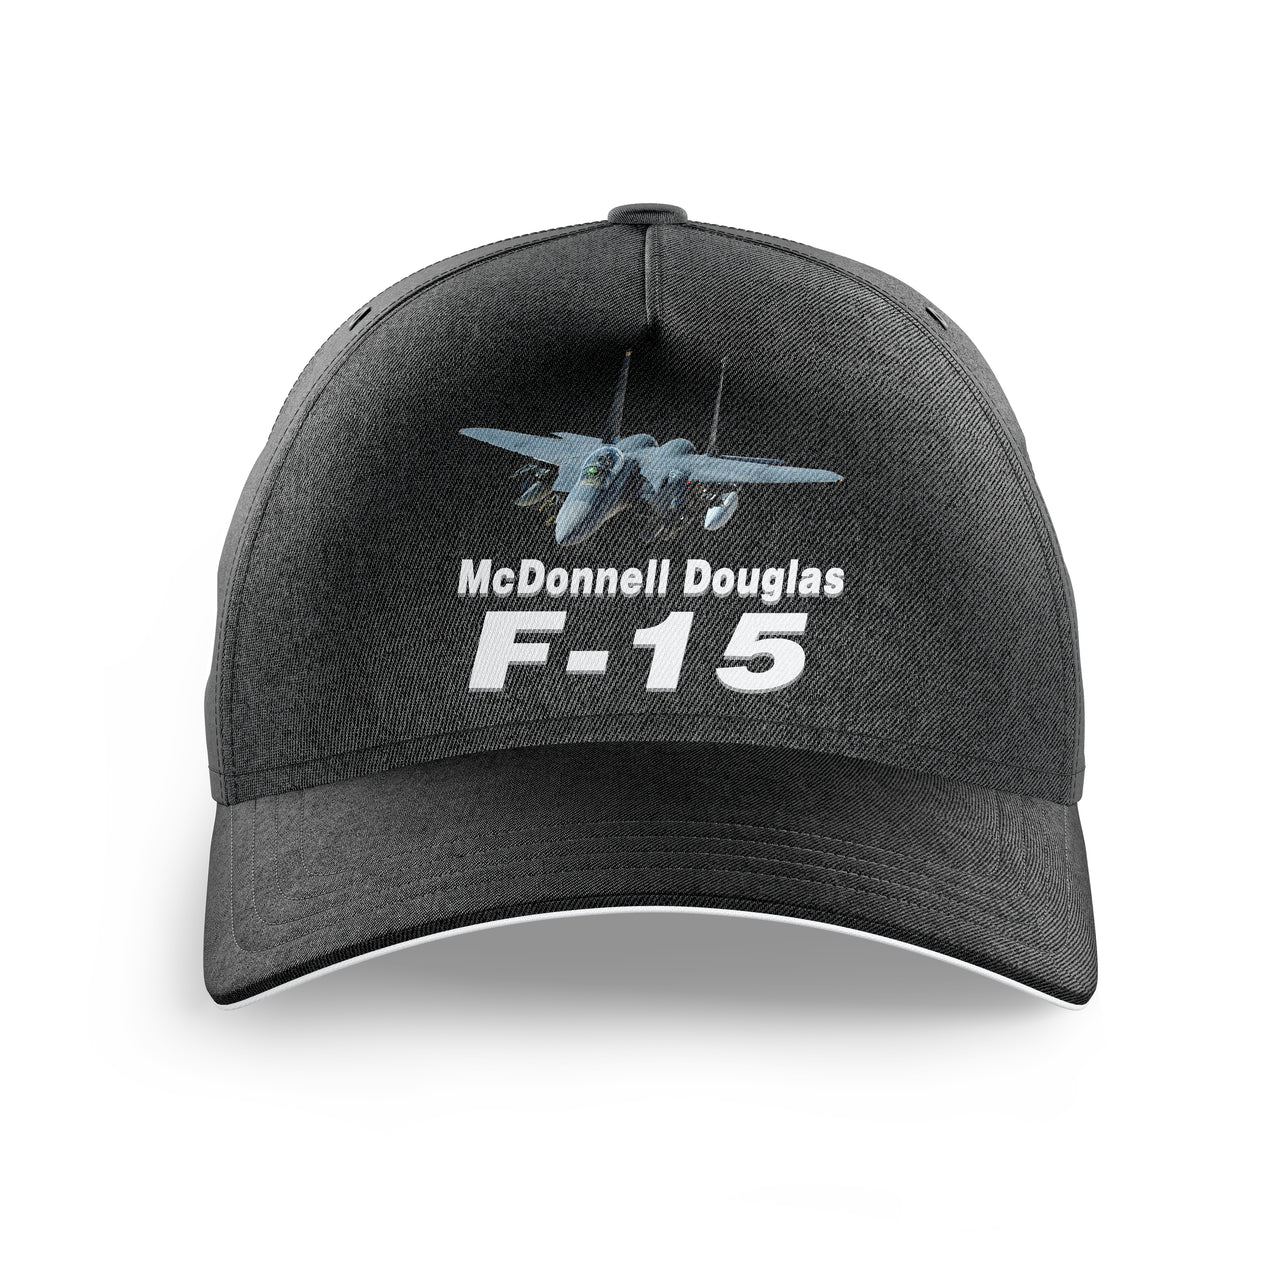 The McDonnell Douglas F15 Printed Hats